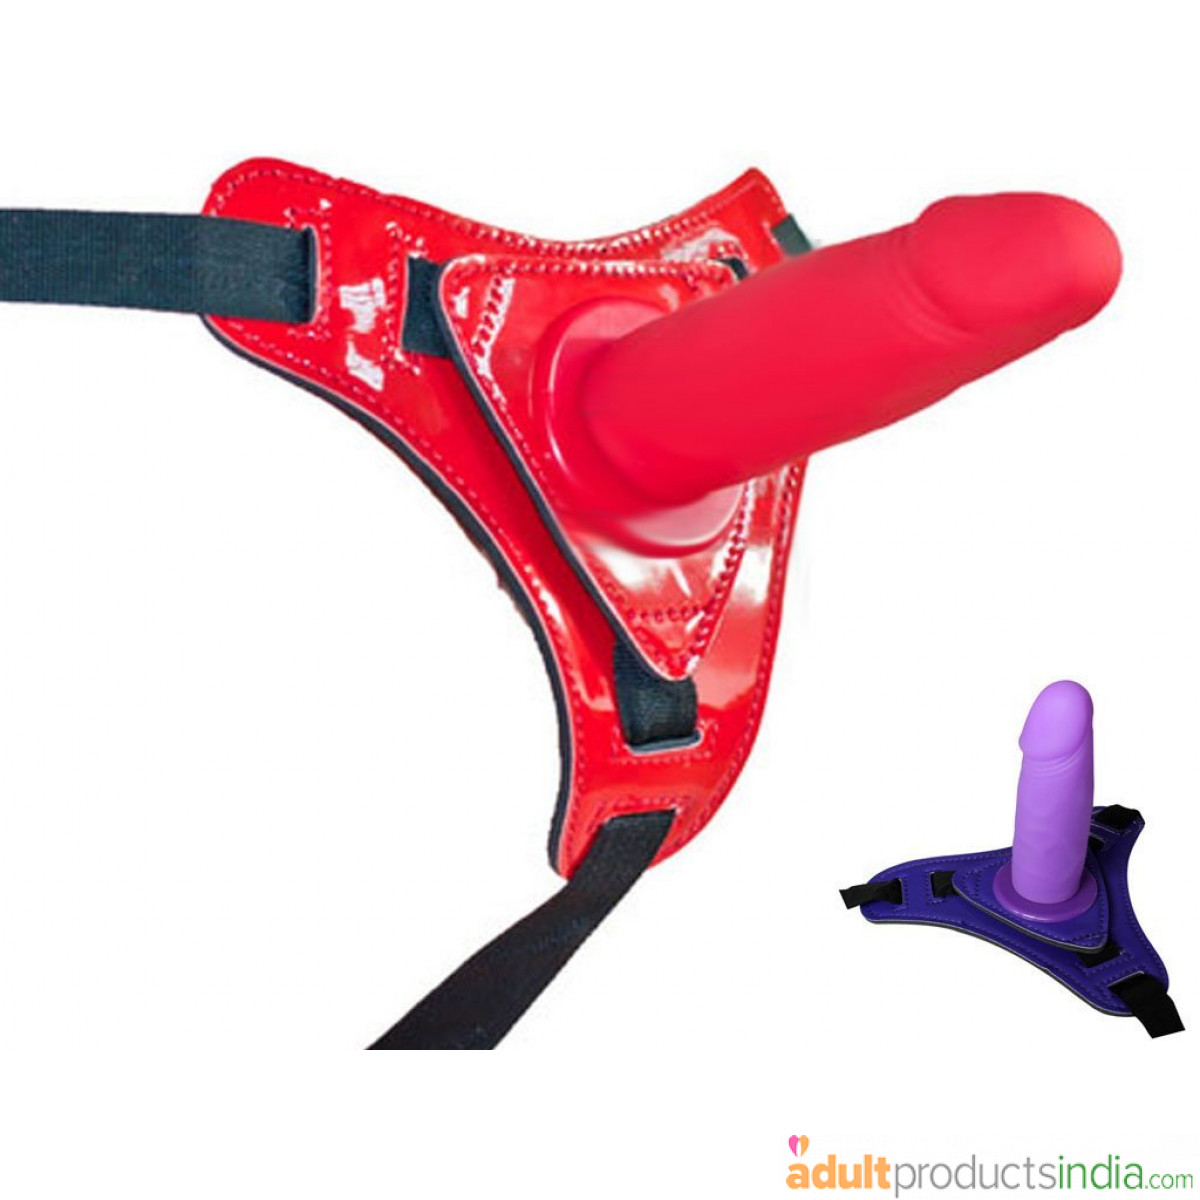 Harness-Silicone Realistic Toy - Red Pink and Purple 